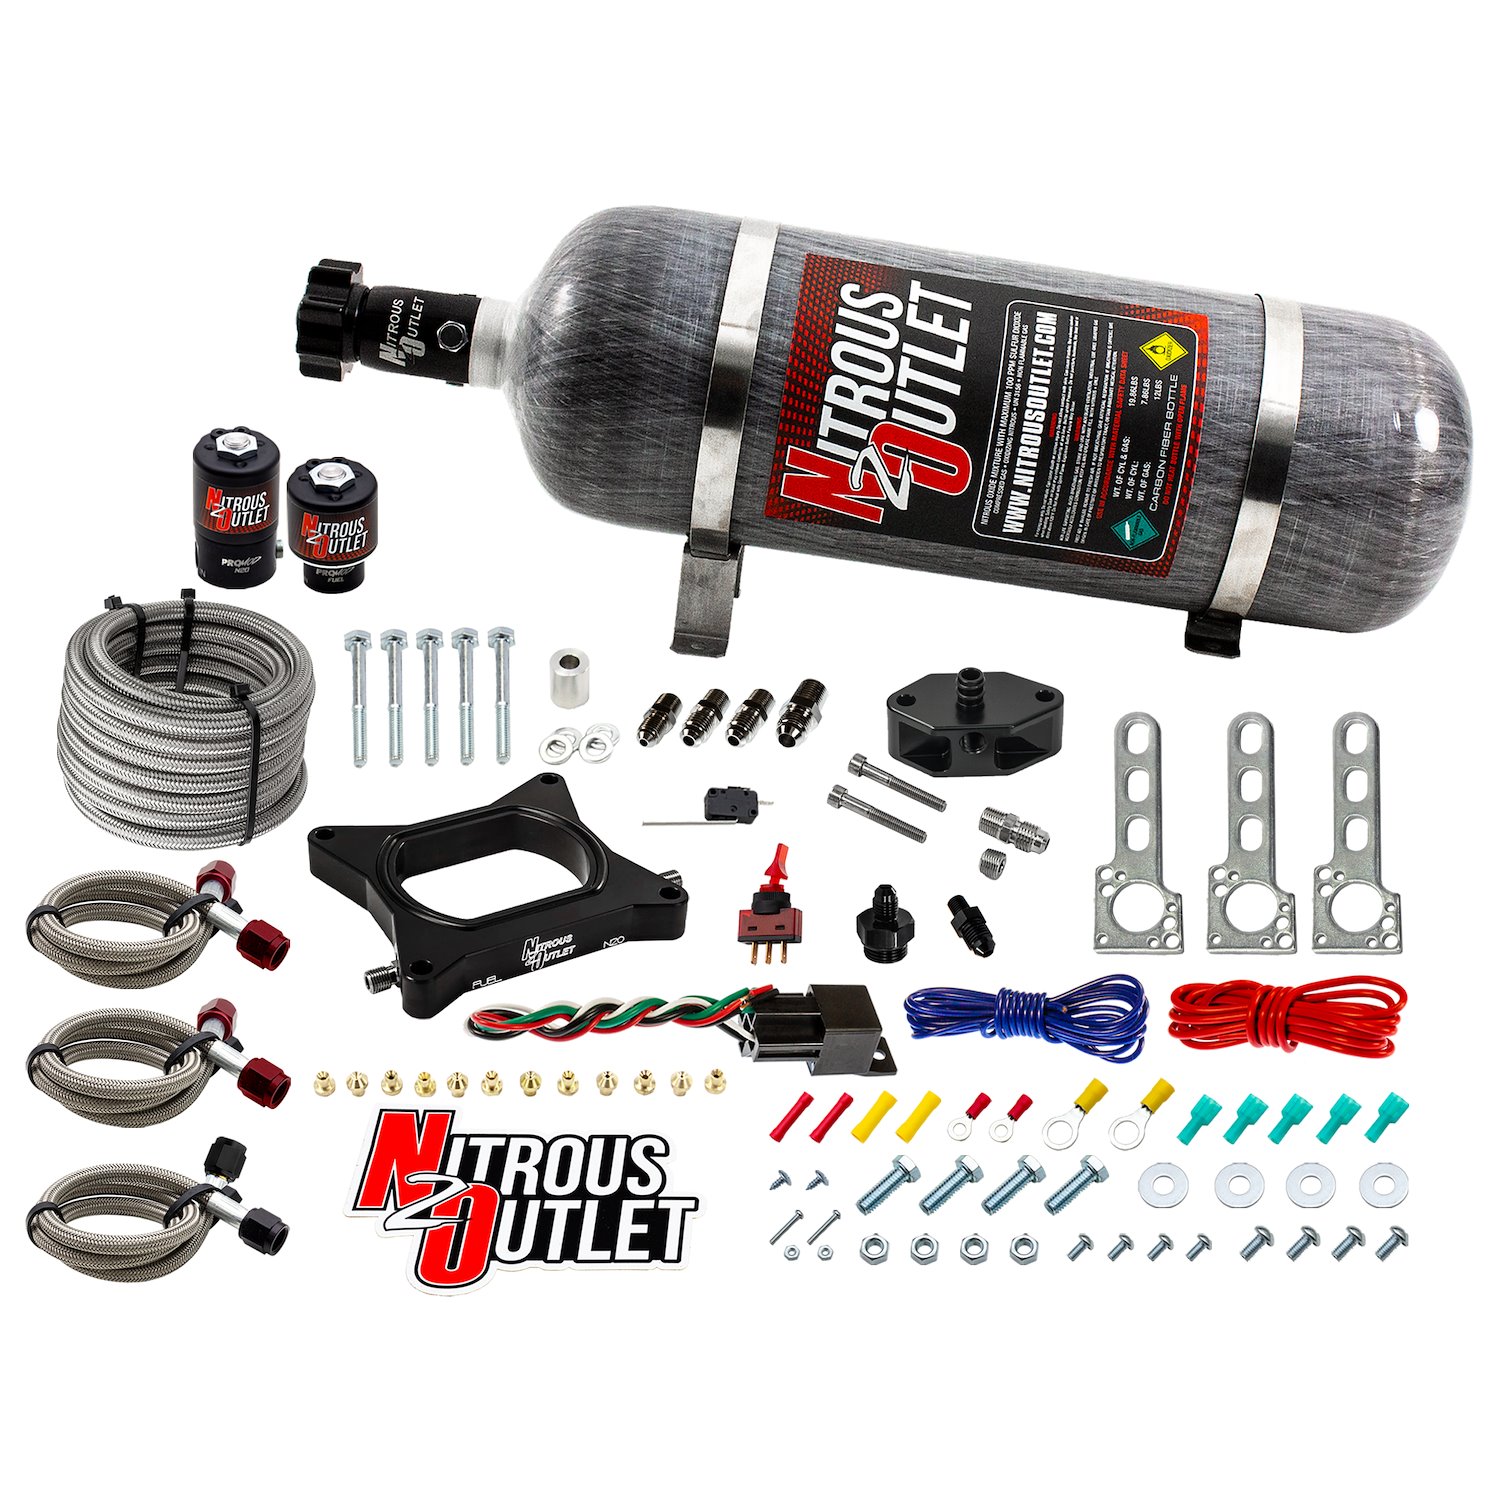 00-10140-12 Ford 1996-2004 4.6L 2V Mustang Plate System, Gas/E85, 5-55psi, 50-200HP, 12lb Bottle